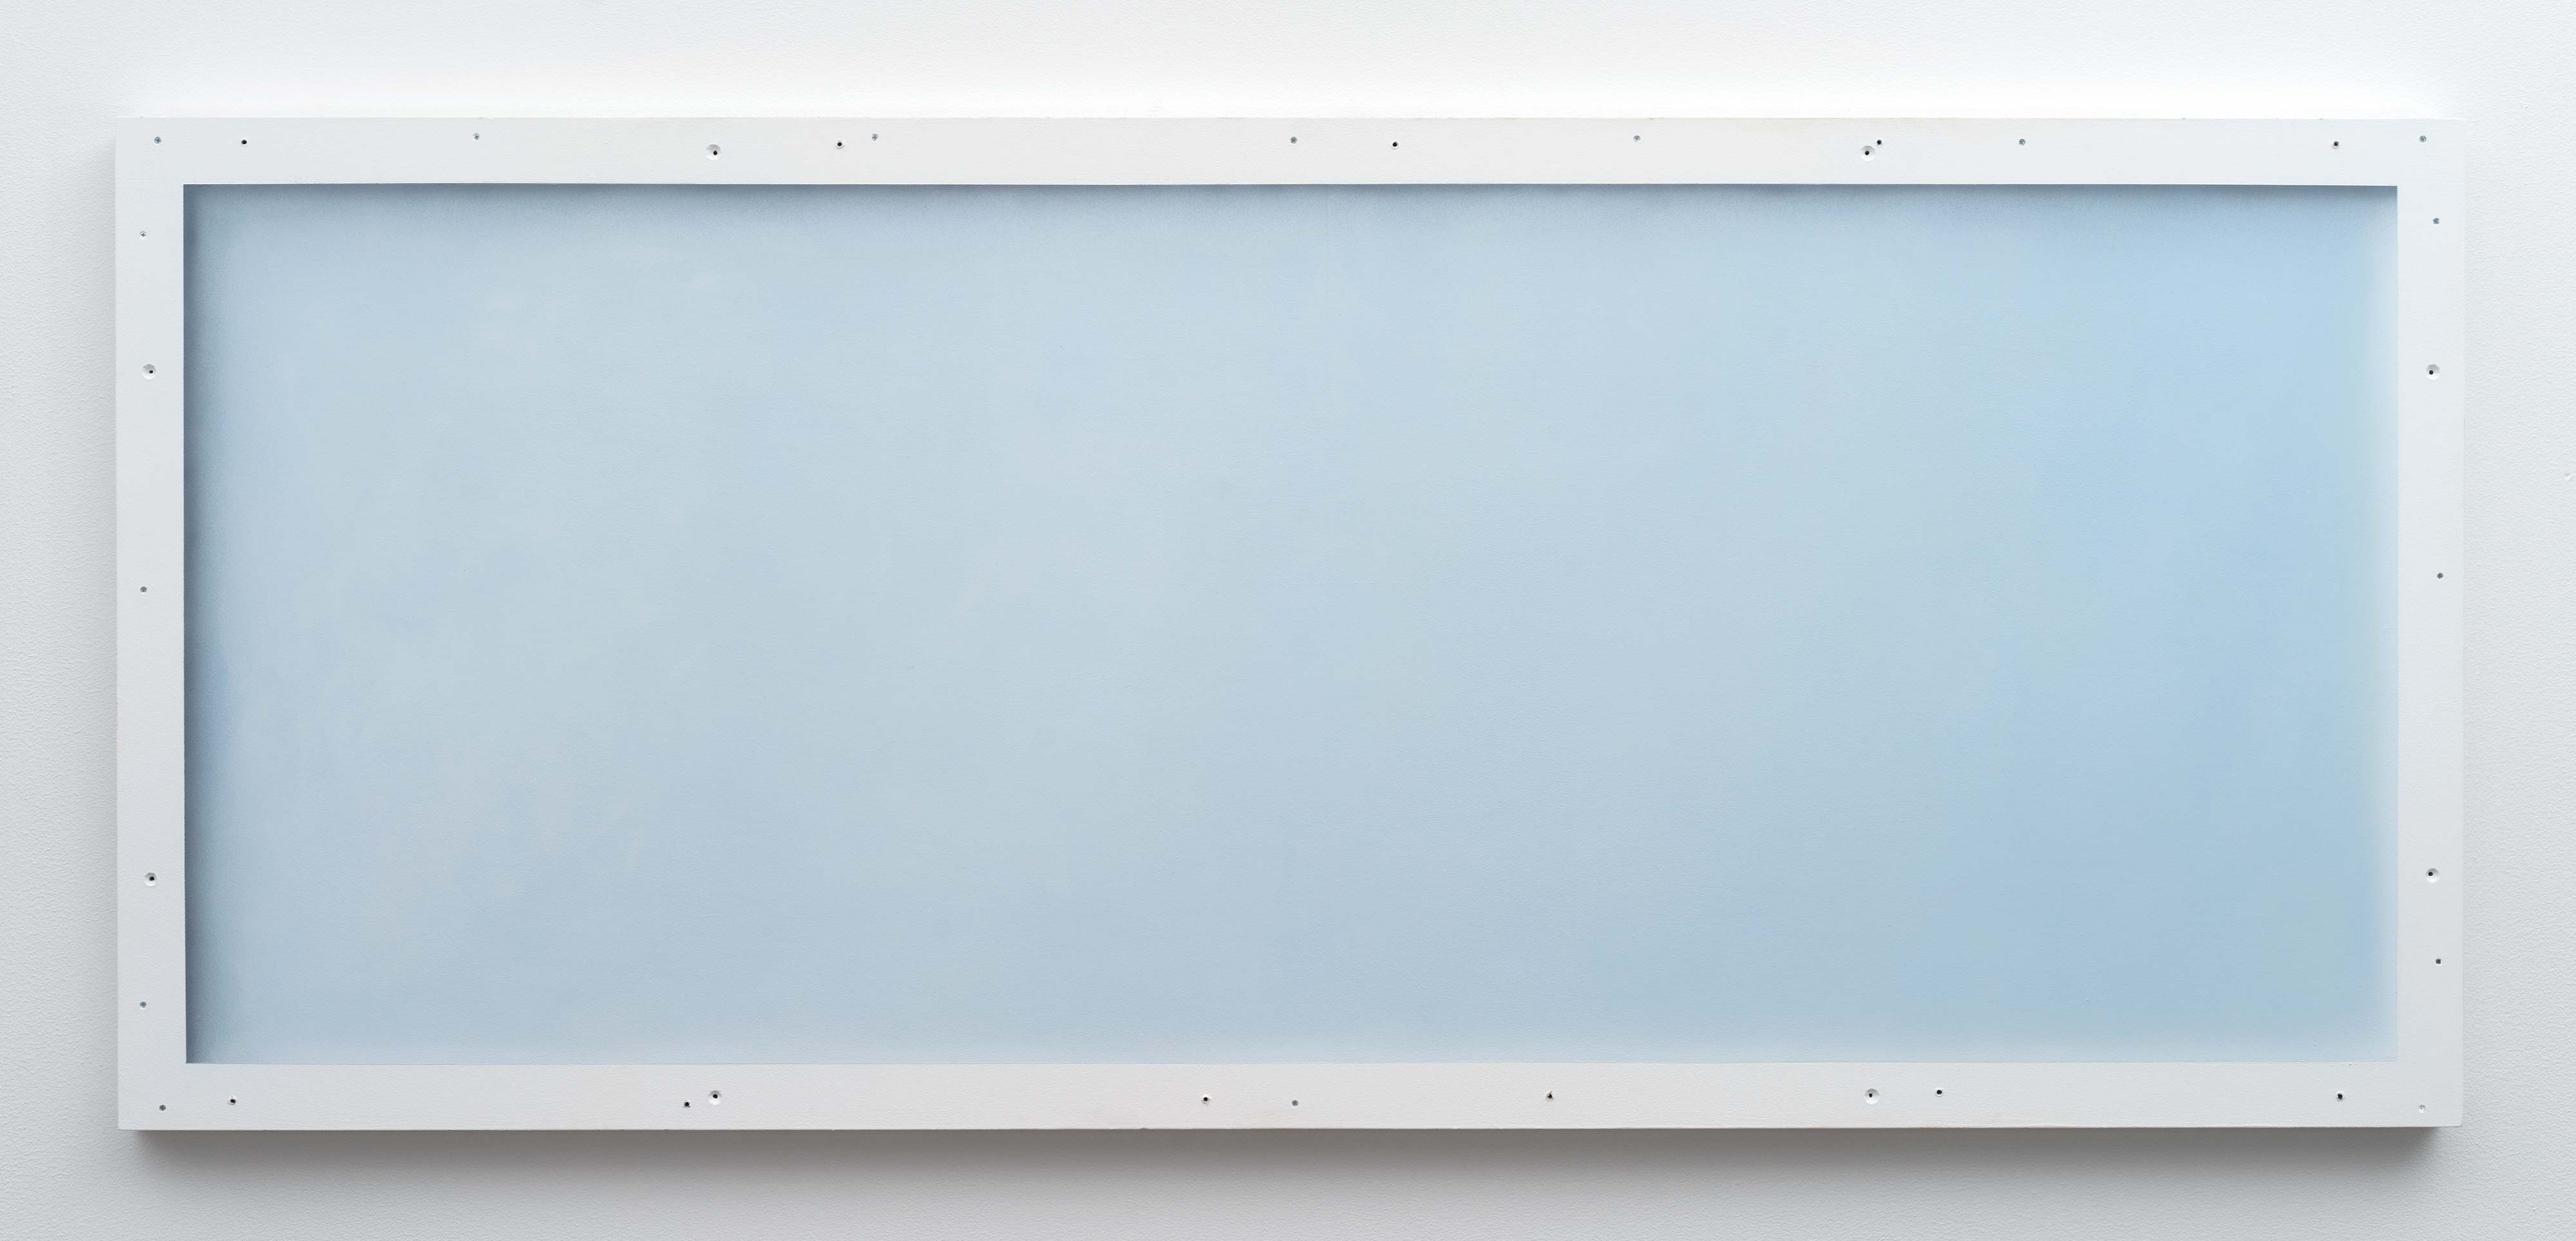 Christopher Page<br>High Noon (II)<br>2016<br>oil and acrylic on panel<br>23.6 x 54.3 in (60 x 138 cm)